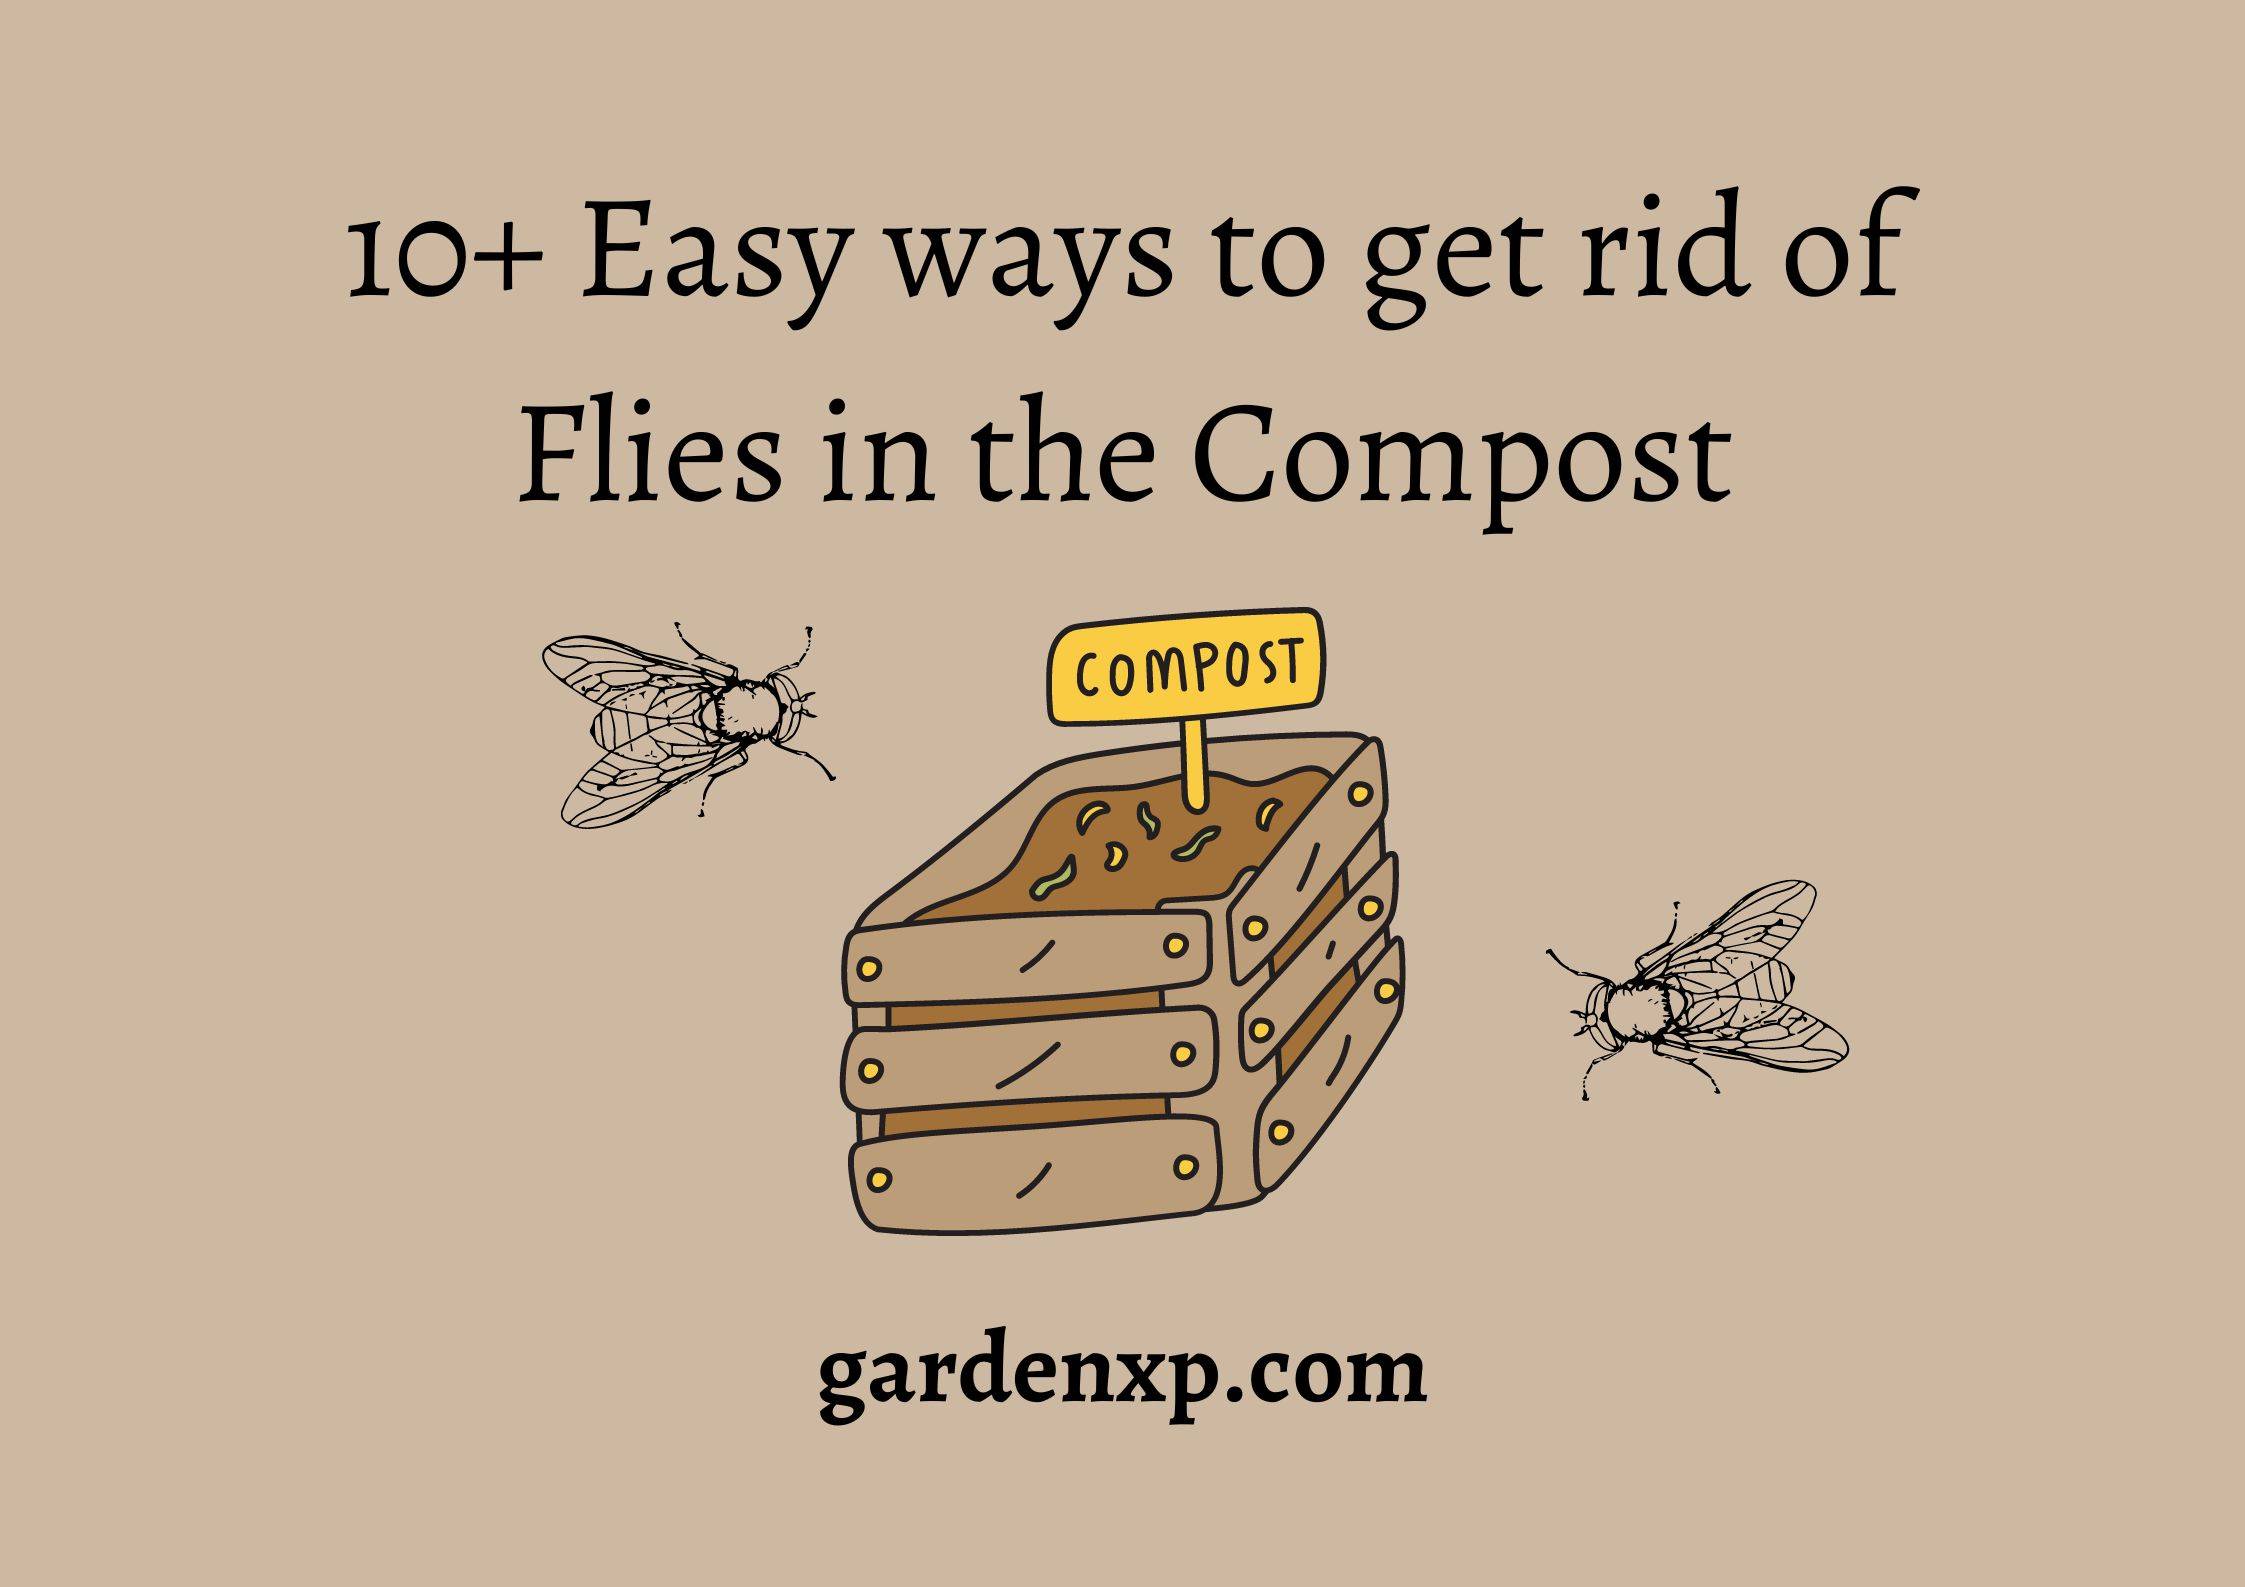 10+ Easy ways to get rid of Flies in the Compost